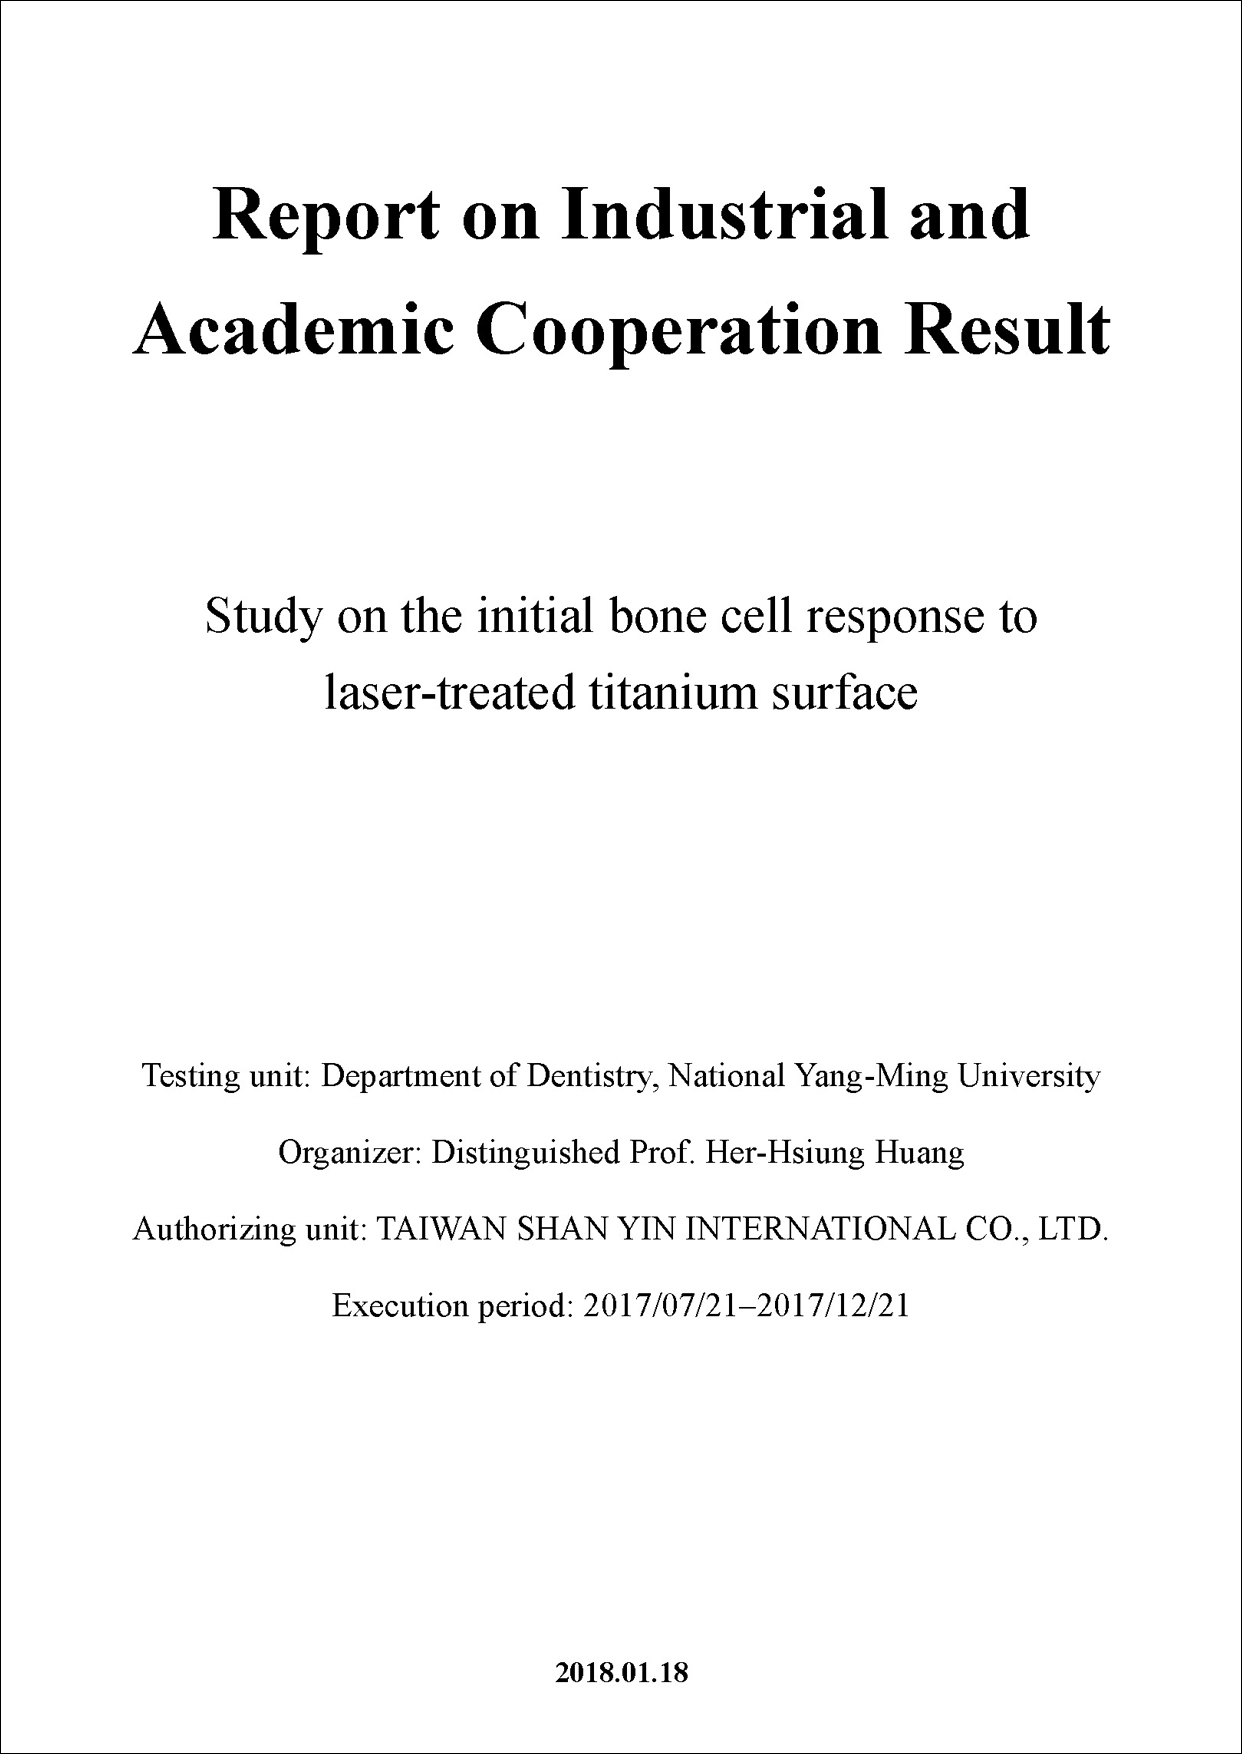 Study on the initial bone cell response to laser-treated titanium surface